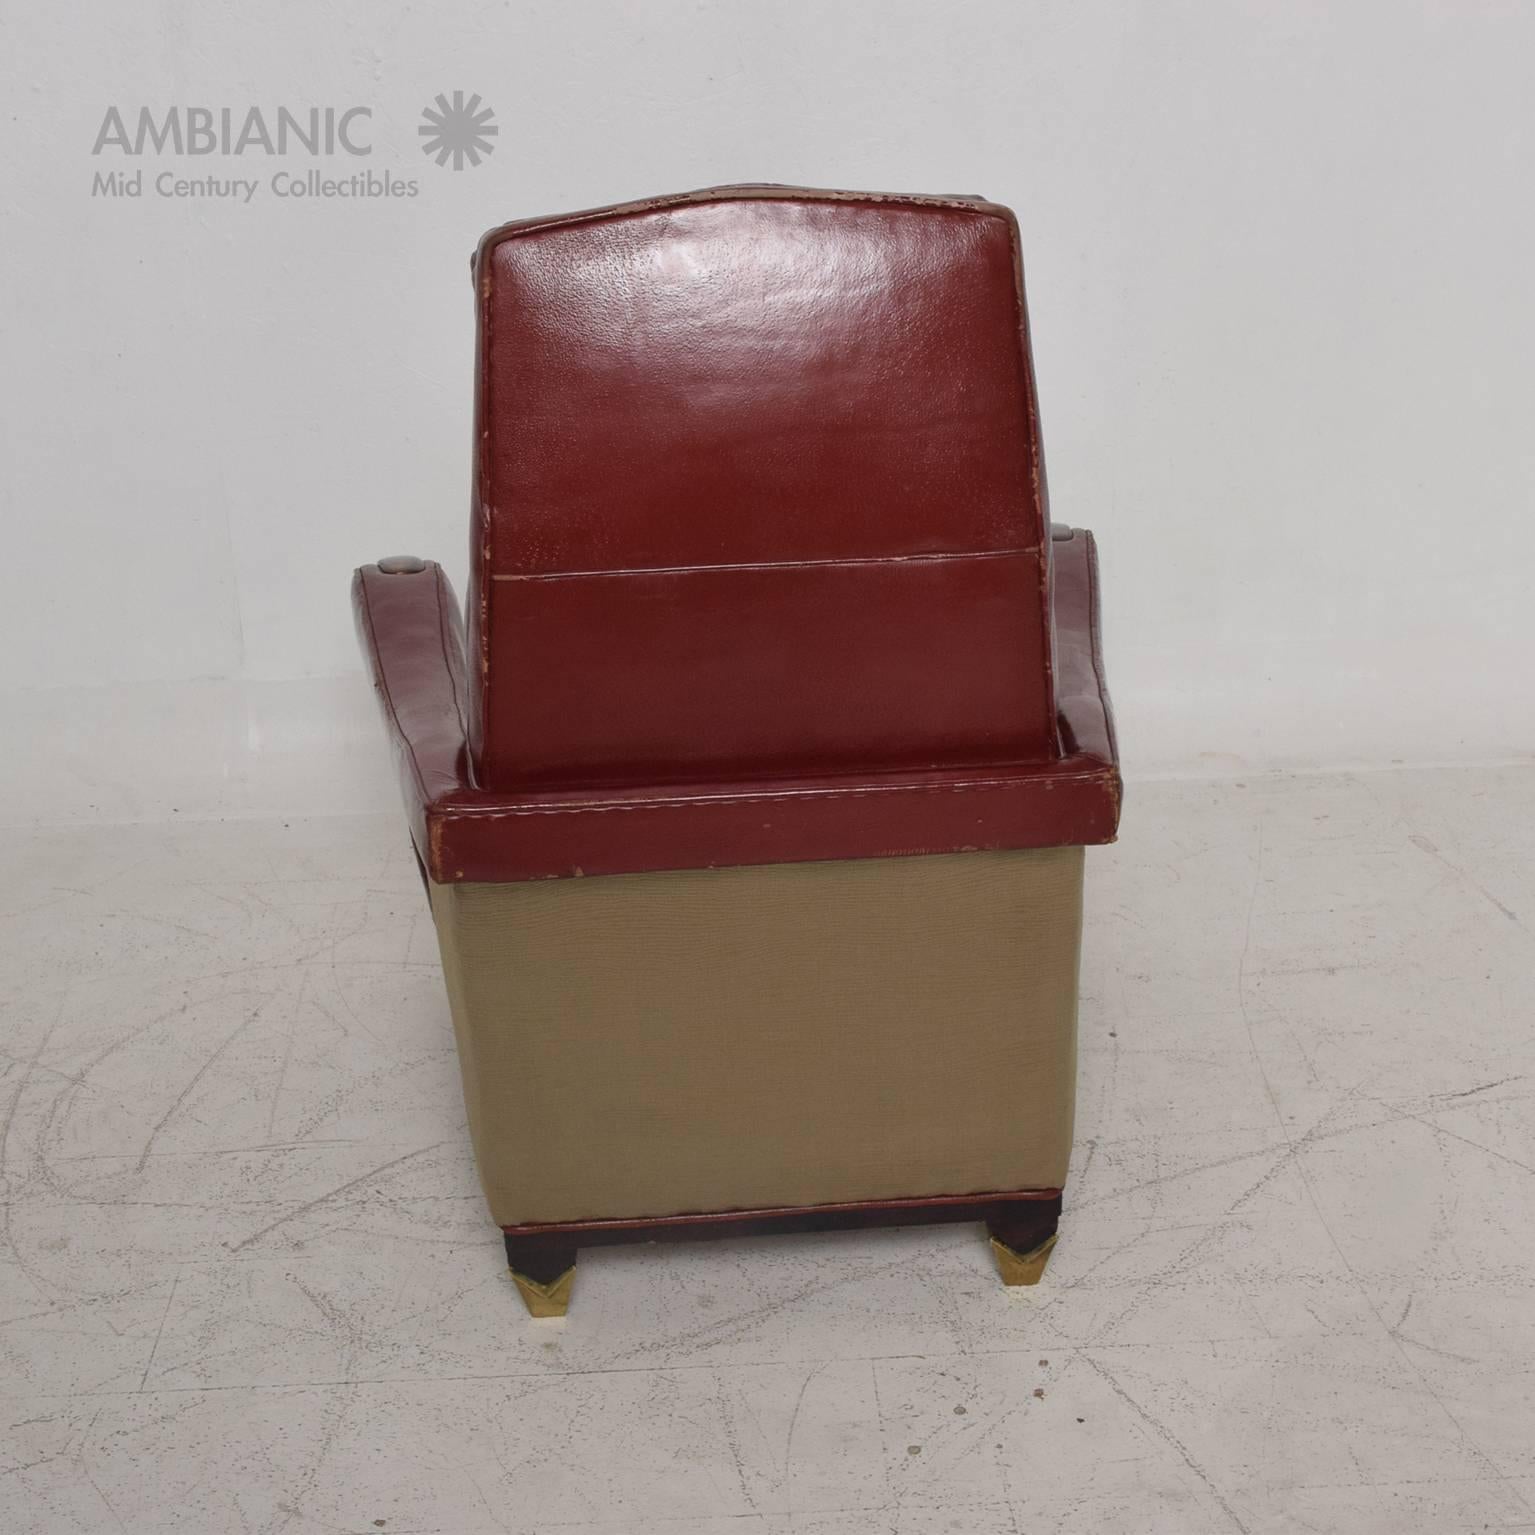 Mexican Modernist Tall Club Chair Ottoman Red Leather Brass Arturo Pani 1